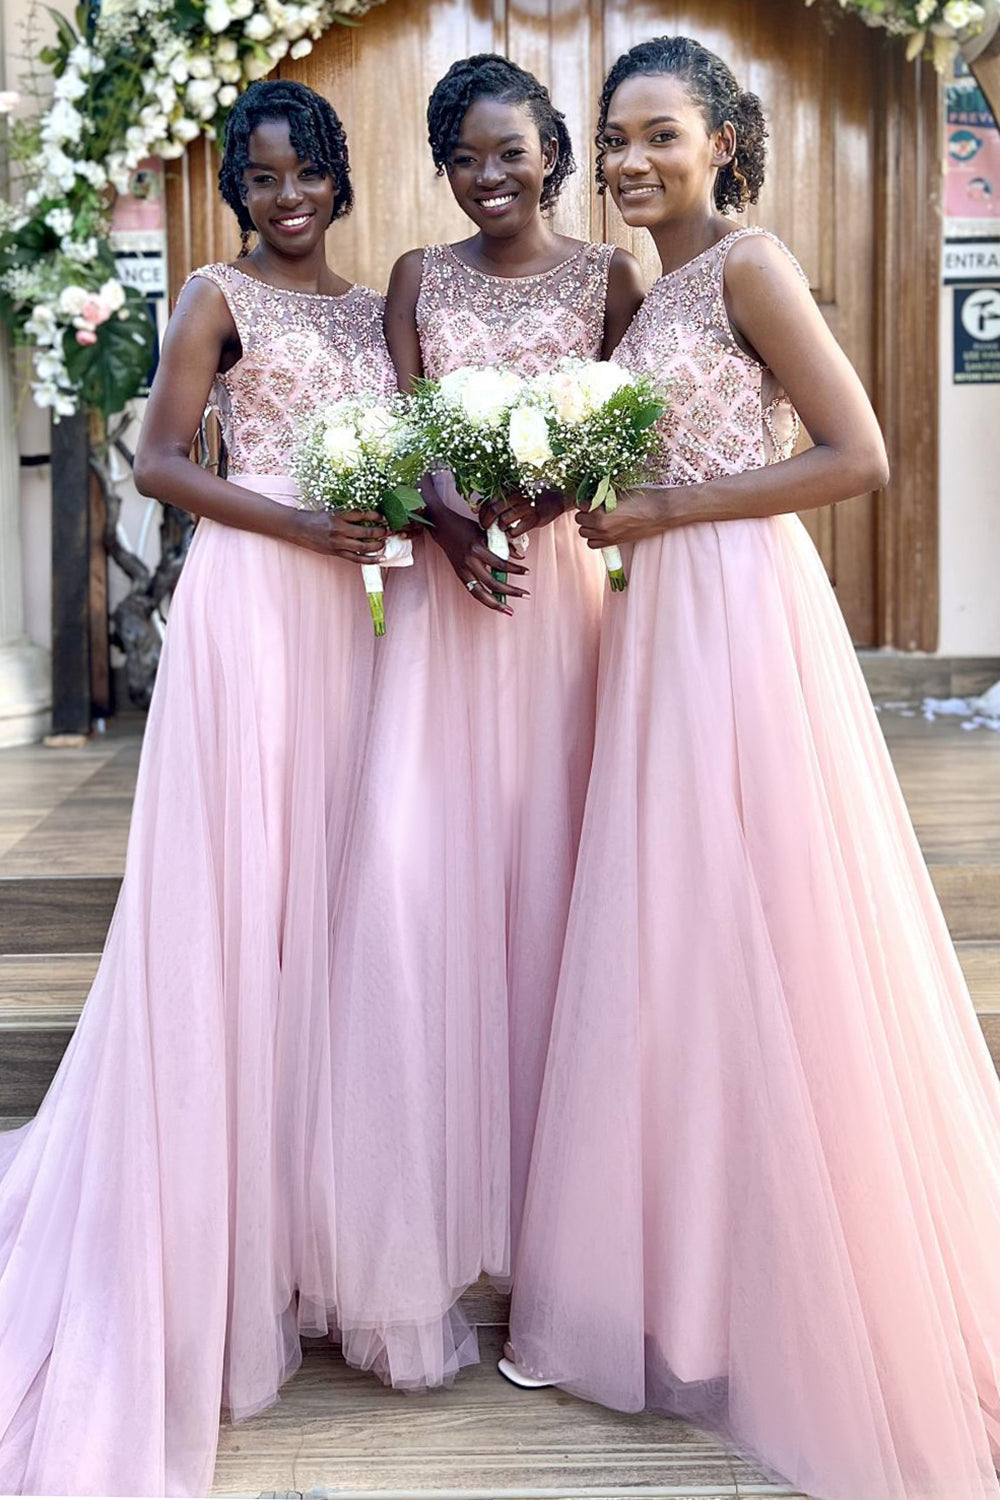 Pink Tulle Beaded A-Line Prom Dress